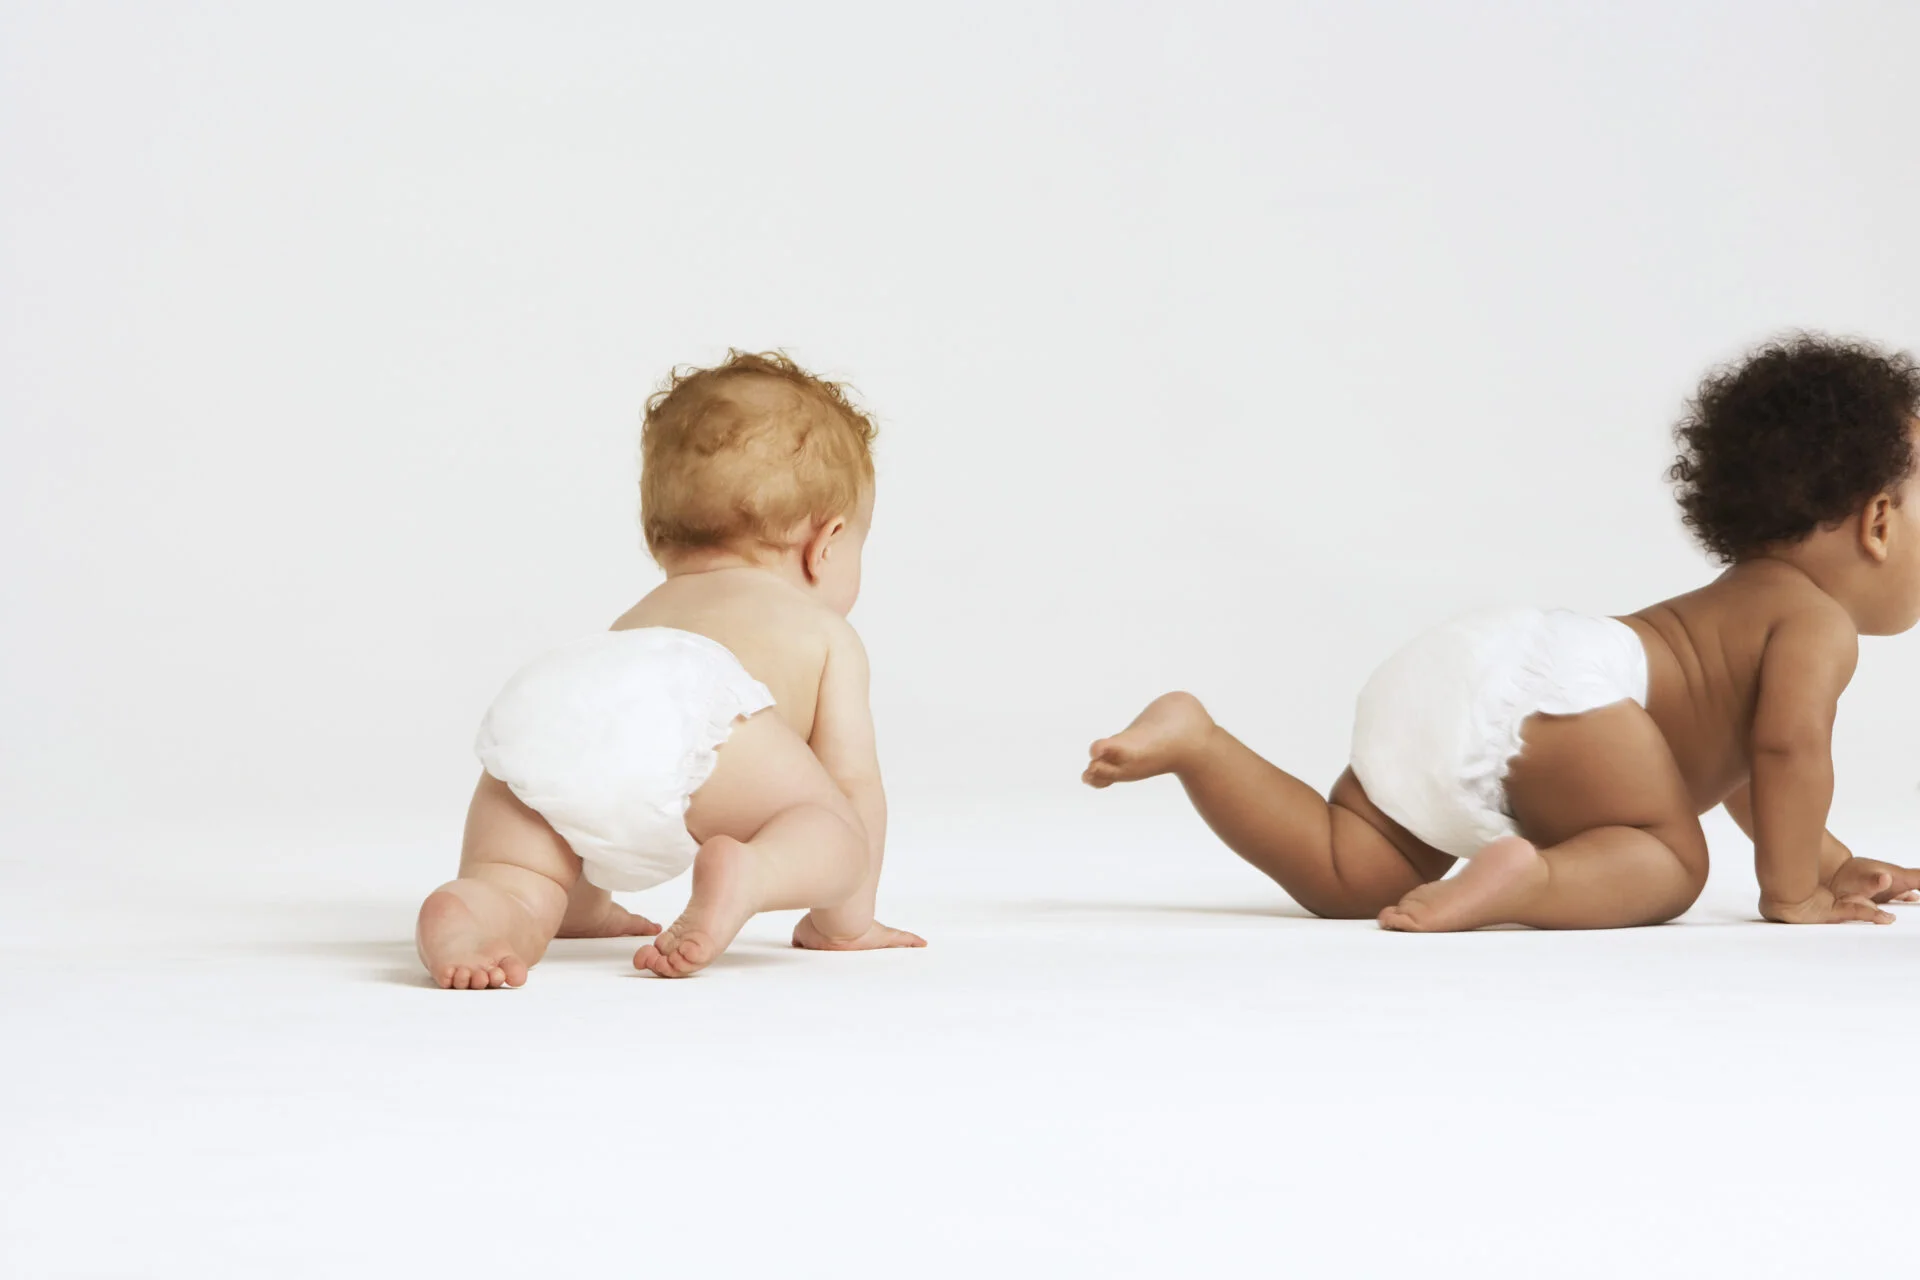 Babies with diapers on crawling away